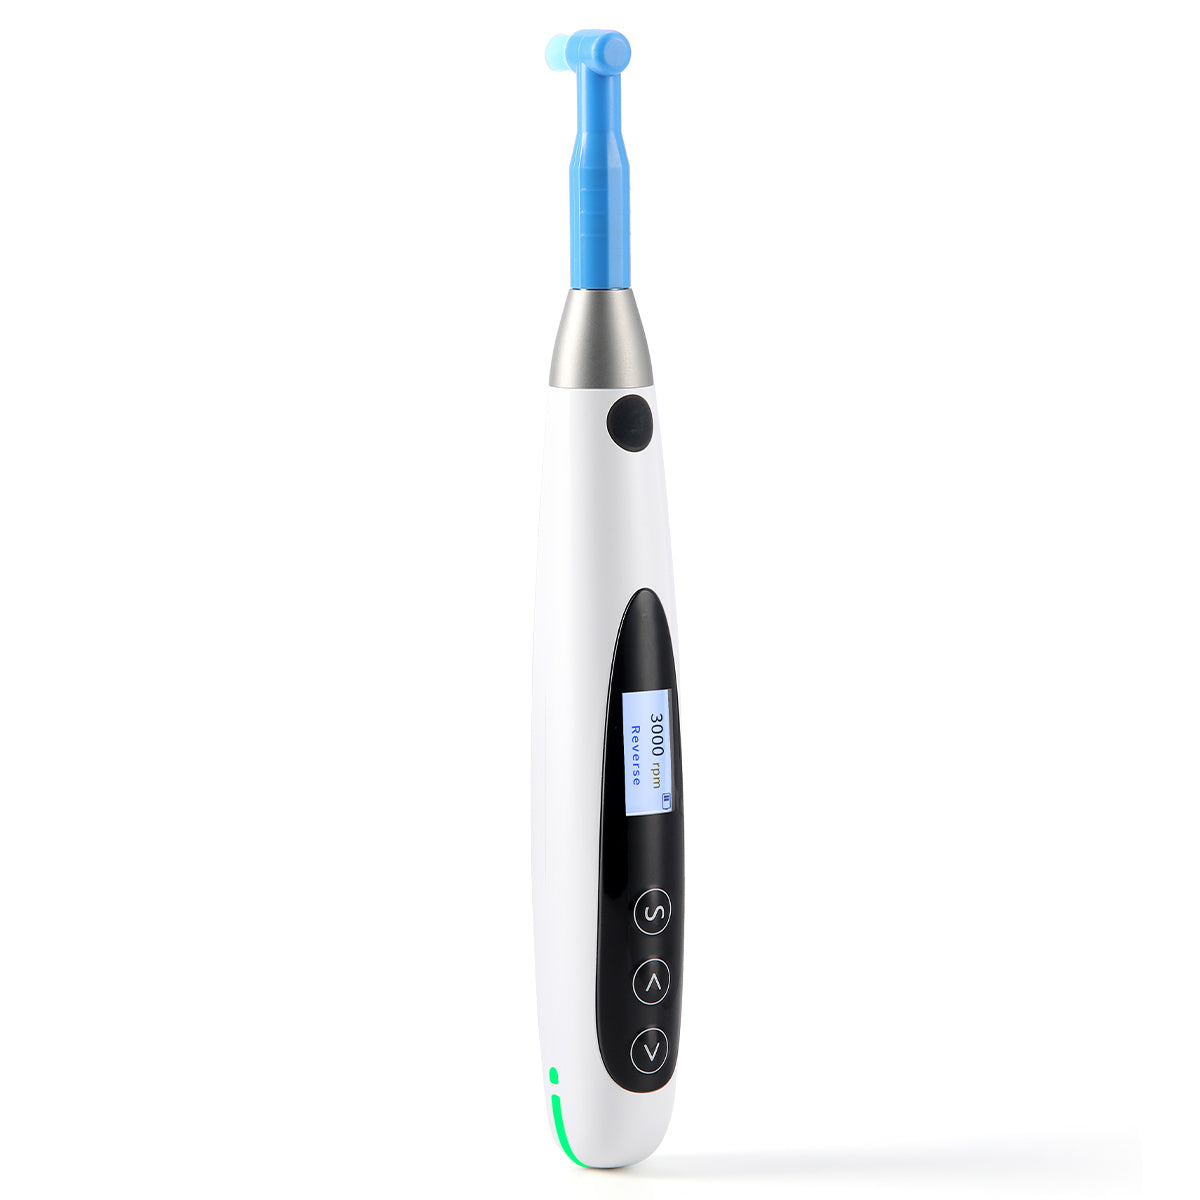 Cordless Hygiene Prophy Handpiece Brushless 10 Speed Settings 360° Rotating - pairaydental.com